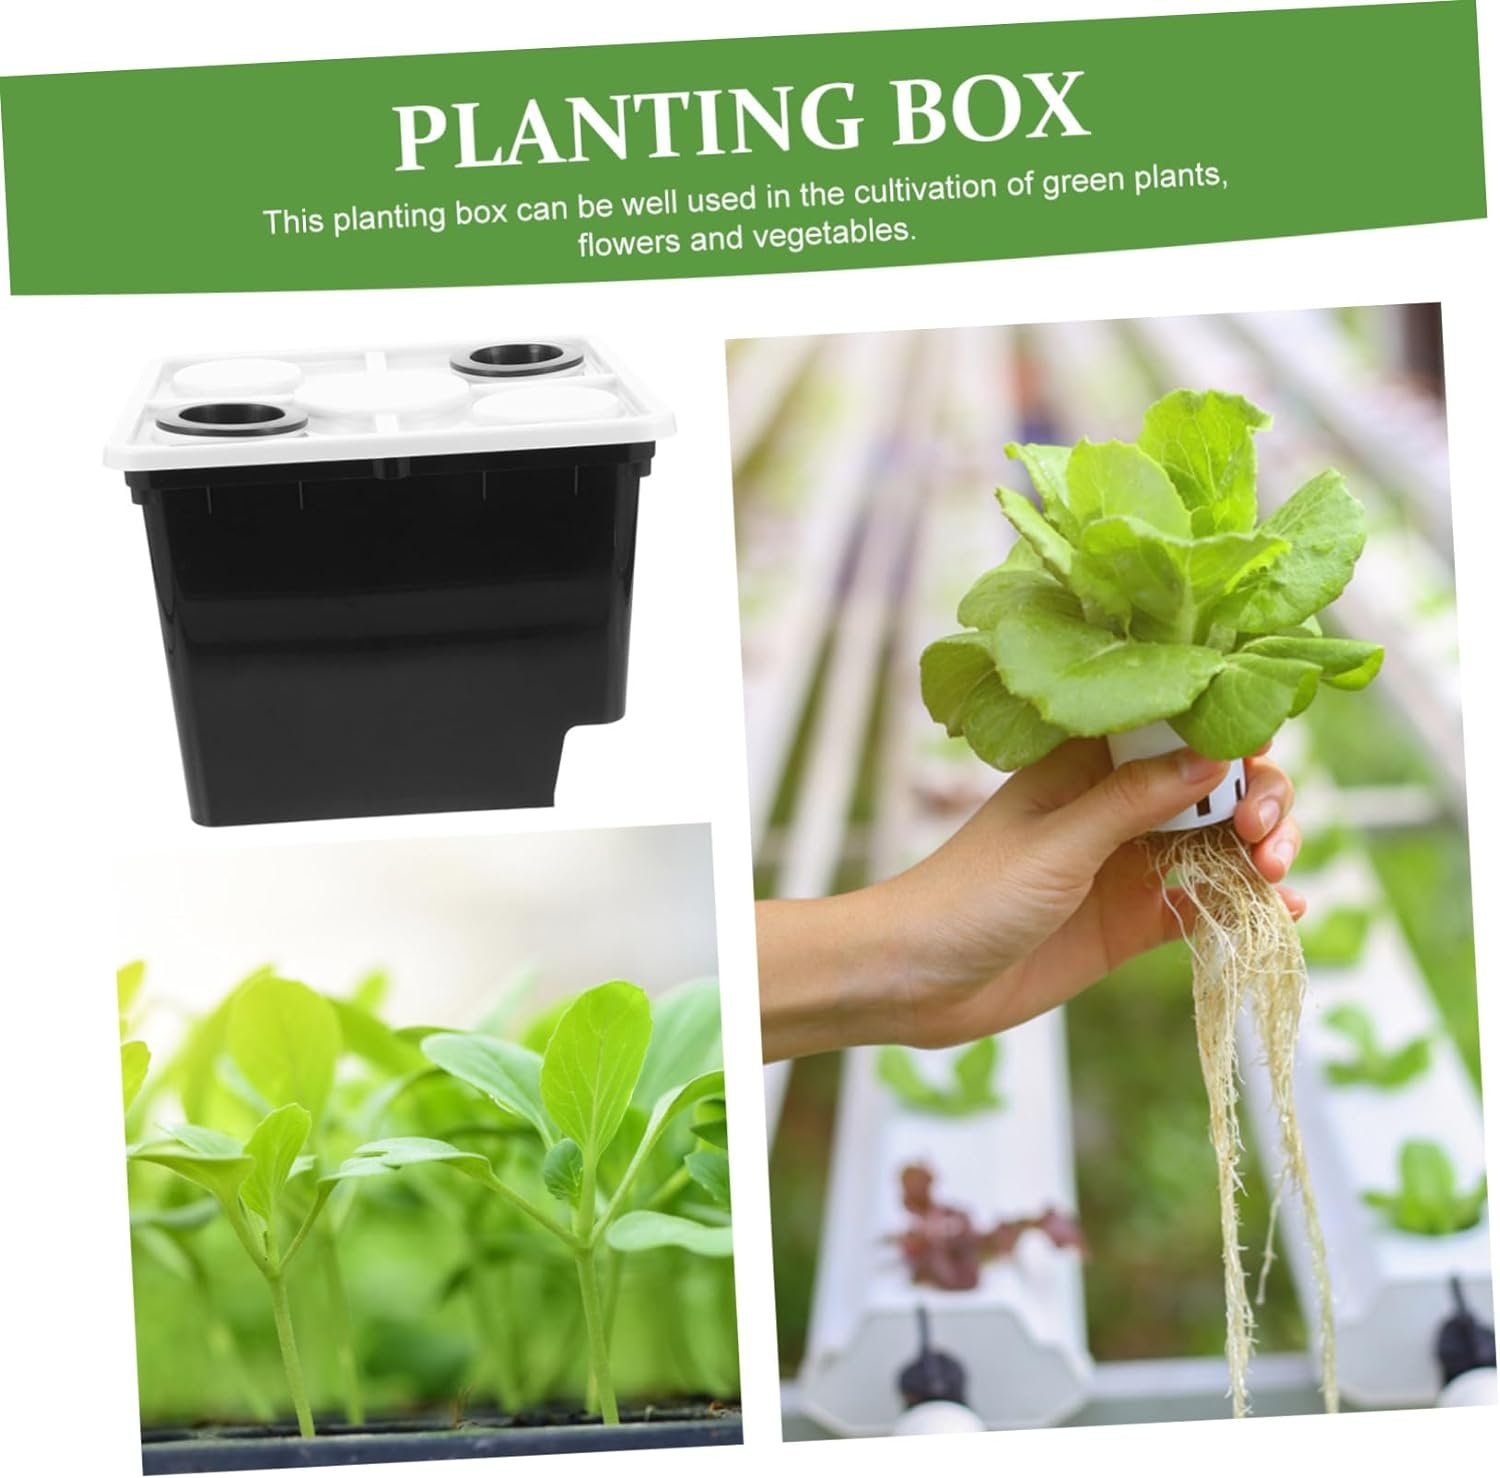 ORFOFE Planting Netherlands Barrel Soilless Cultivation Barrel Soilless Cultivation Cabinet Hydroponics System Bucket Deep Water Culture Hydroponic Kit Kits Plastic Tool Dripping Water